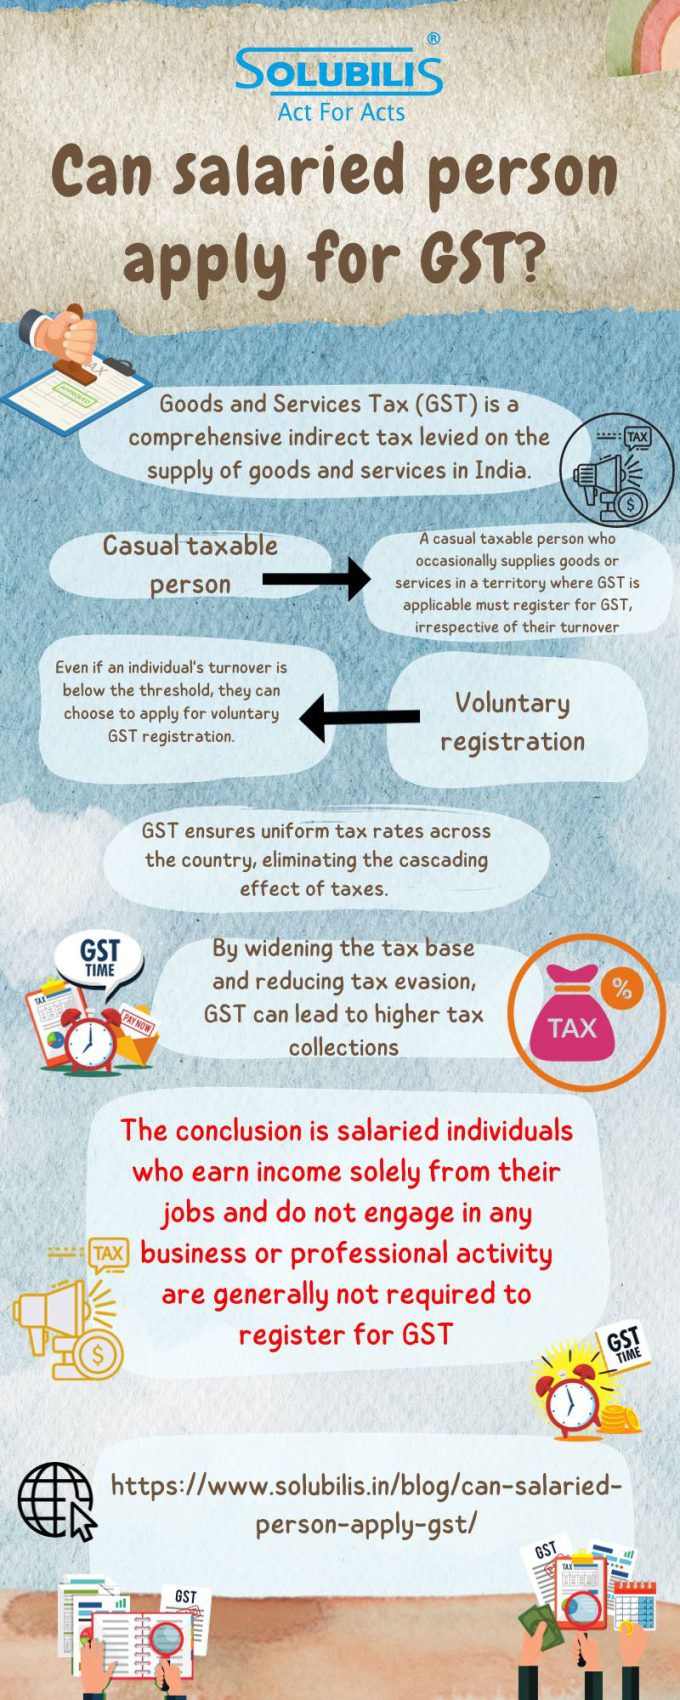 Can salaried person apply for GST?